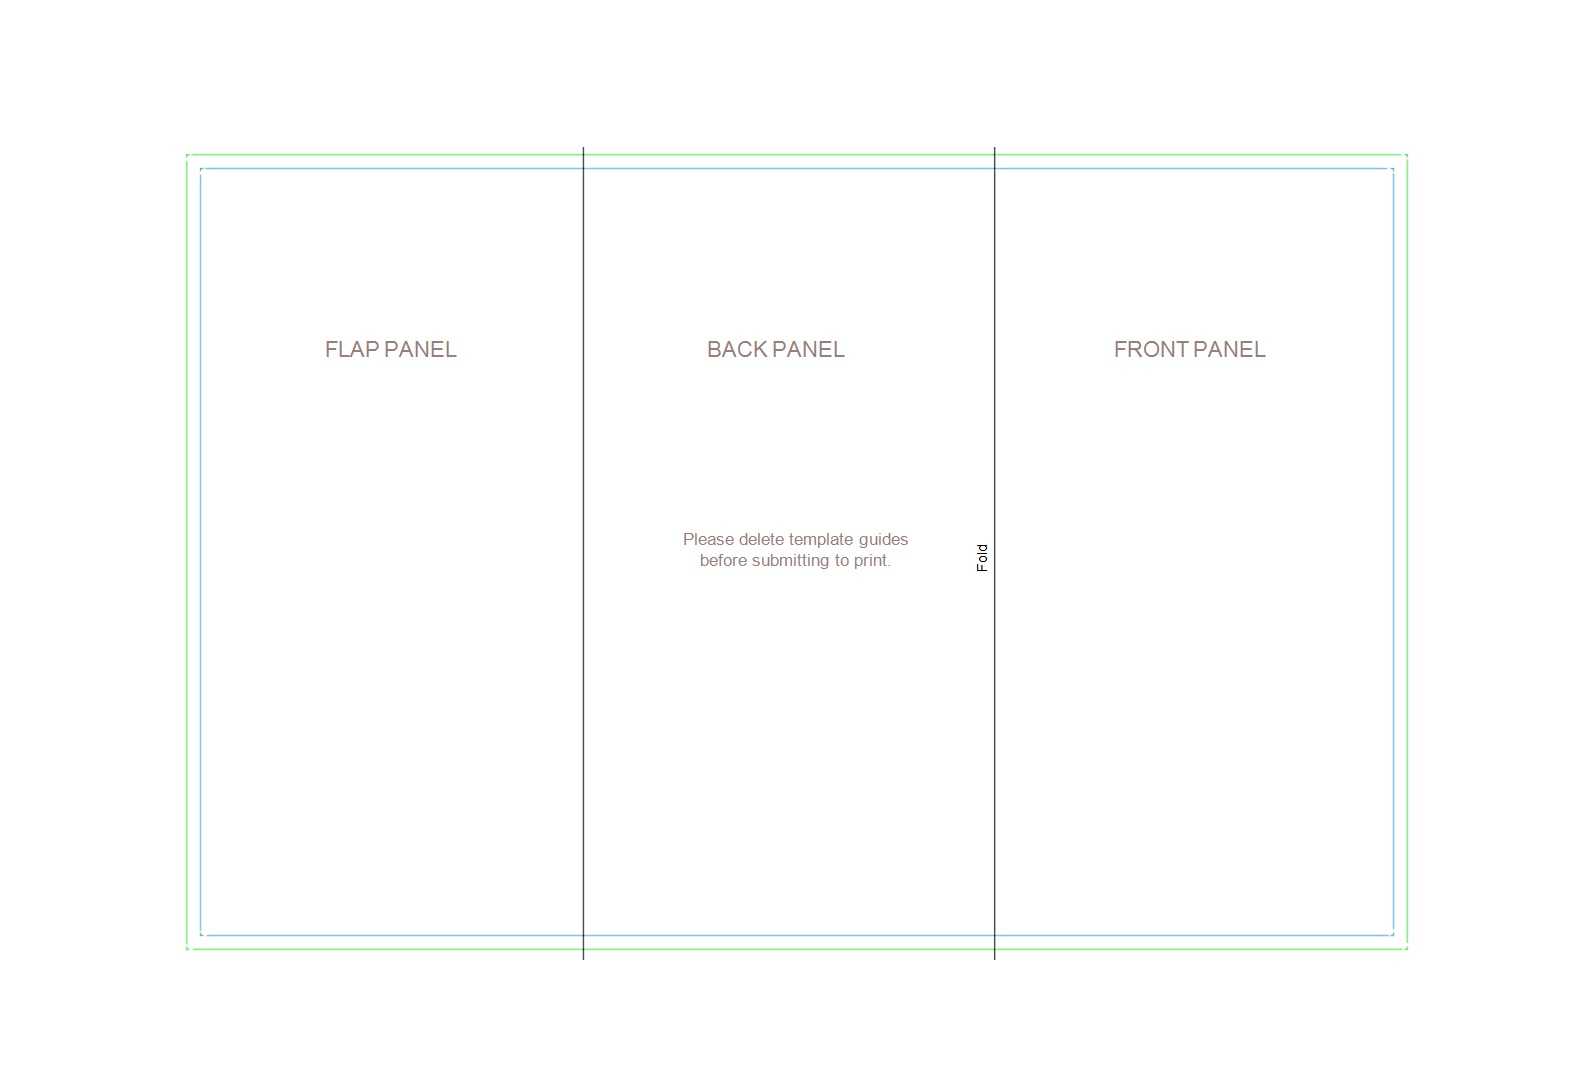 Pamphlet Template Docs - Dalep.midnightpig.co Intended For Brochure Template Google Drive